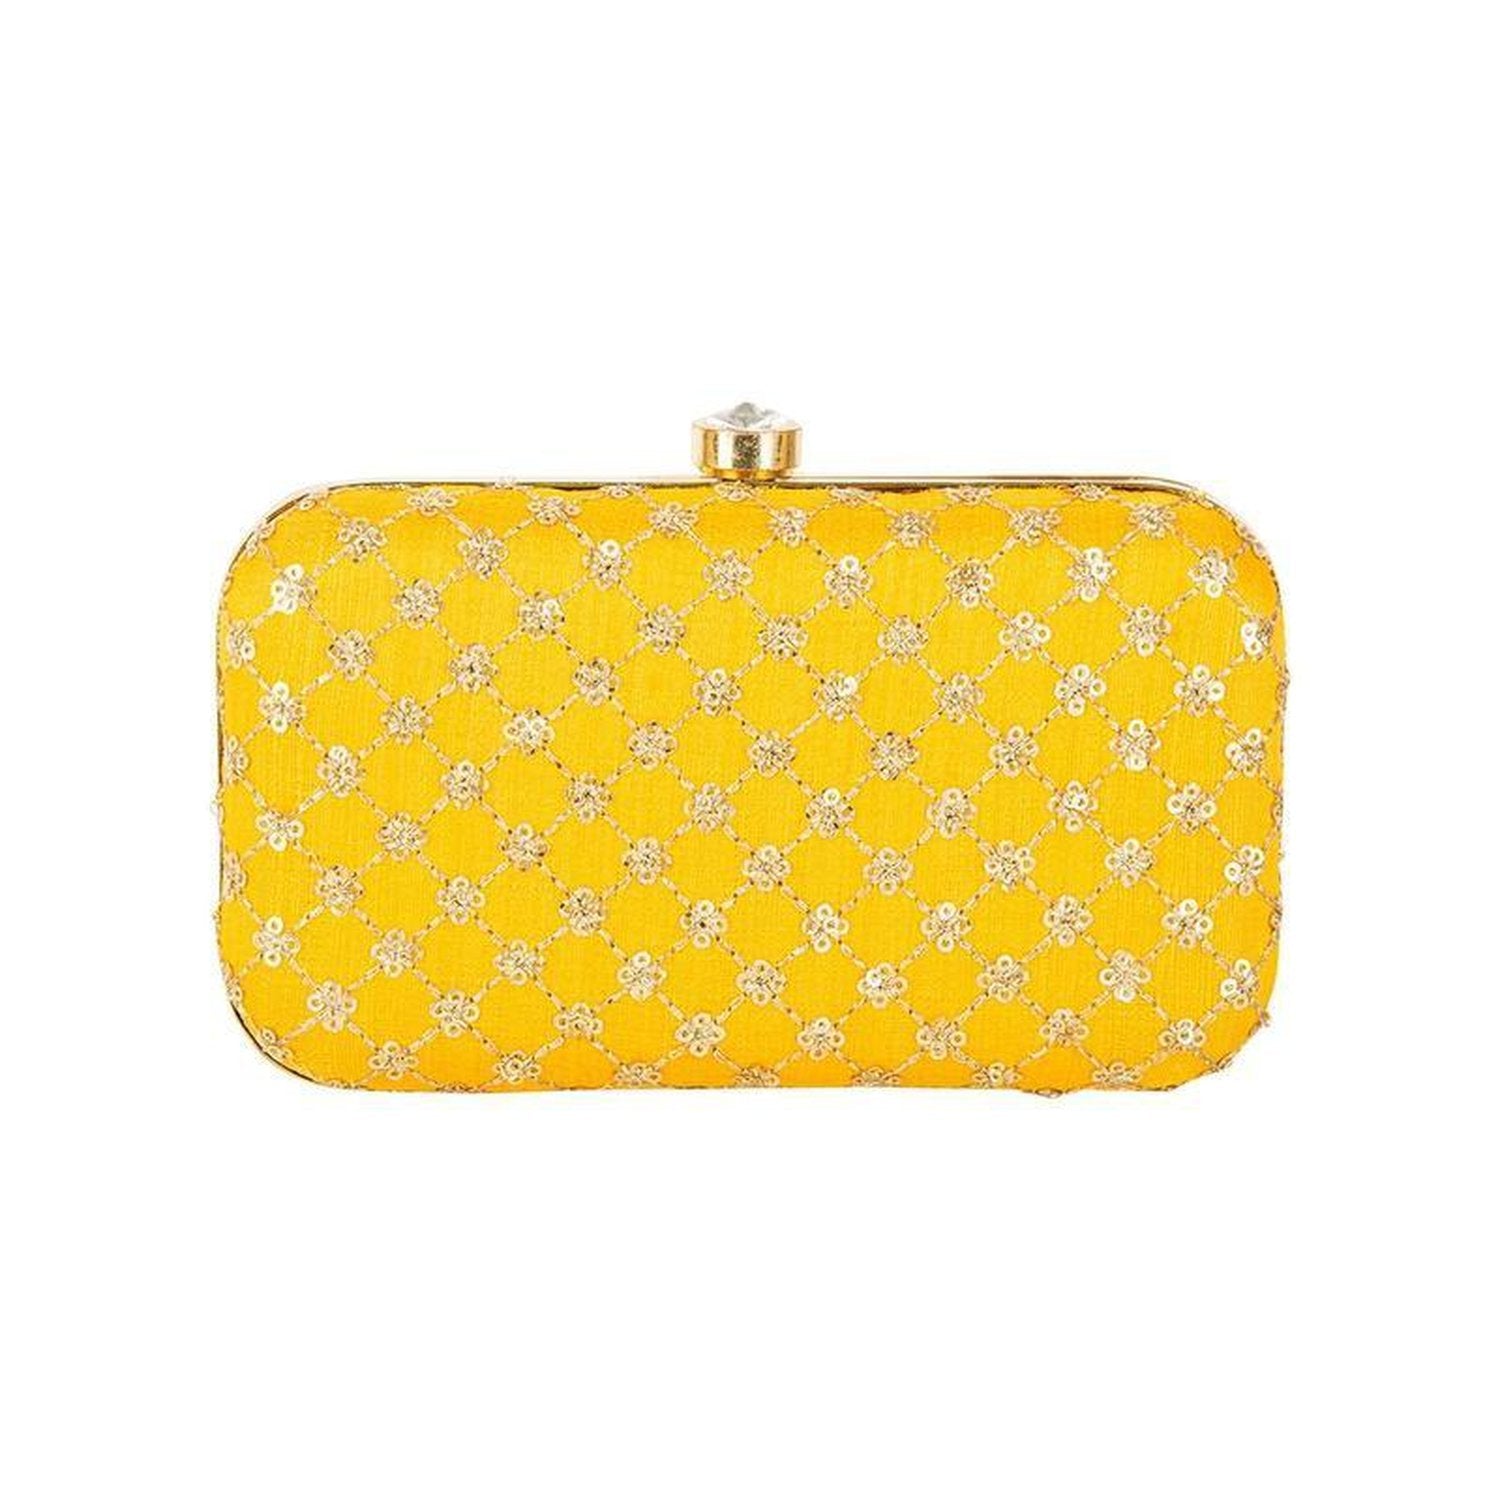 Buy Closeout Brand River Yellow Genuine Crocodile Leather Clutch Bag ,  Clutches for Women , Leather Handbag , Clutch Purse at ShopLC.